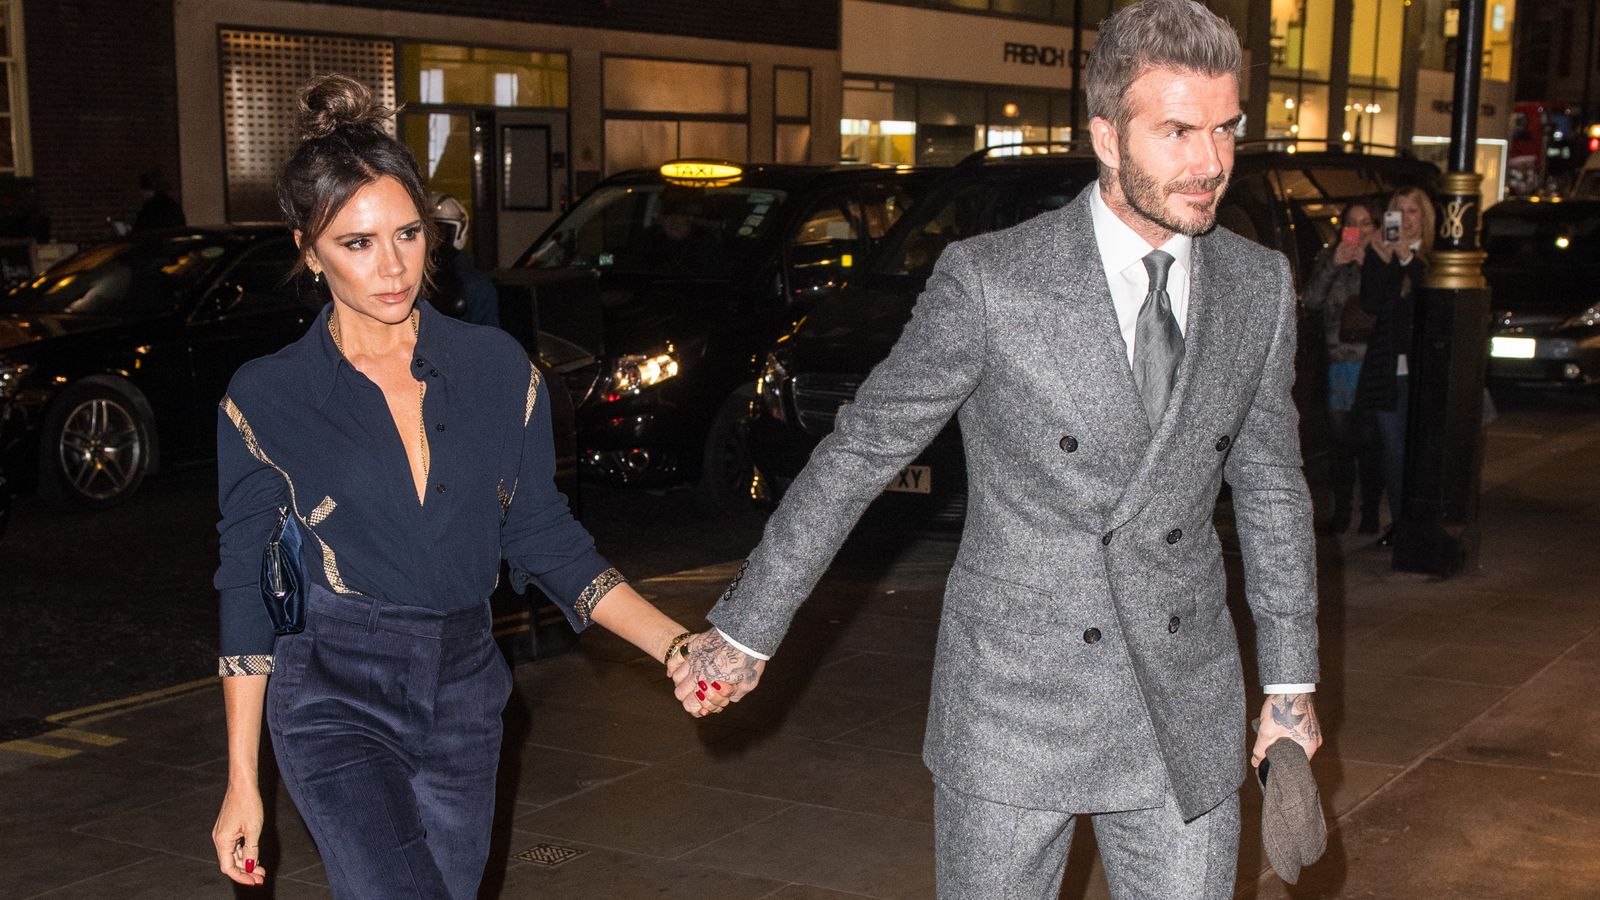 David Beckham shares throwback picture with Victoria - celebrating 24 years of marriage 